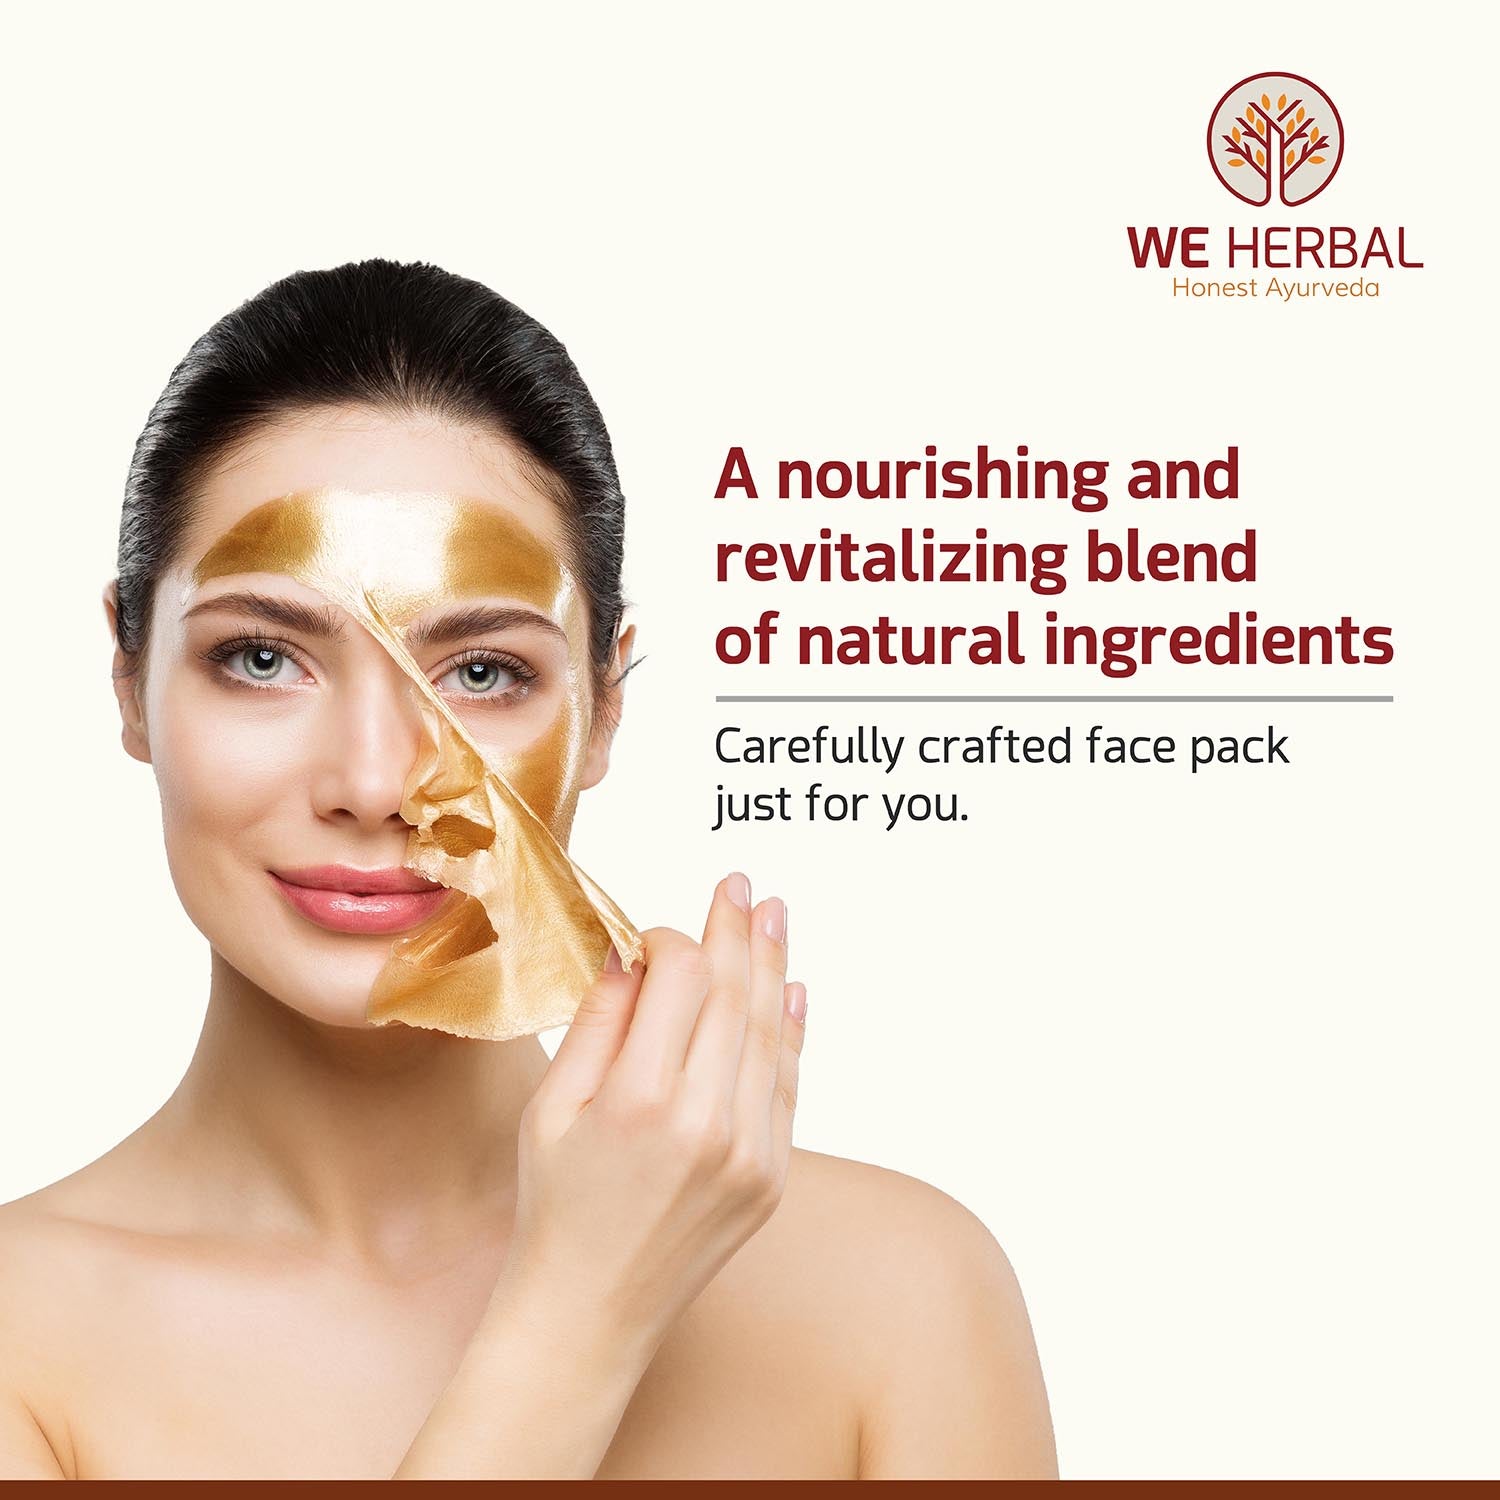 Herbal Face Mask We Herbal | Back to the Nature